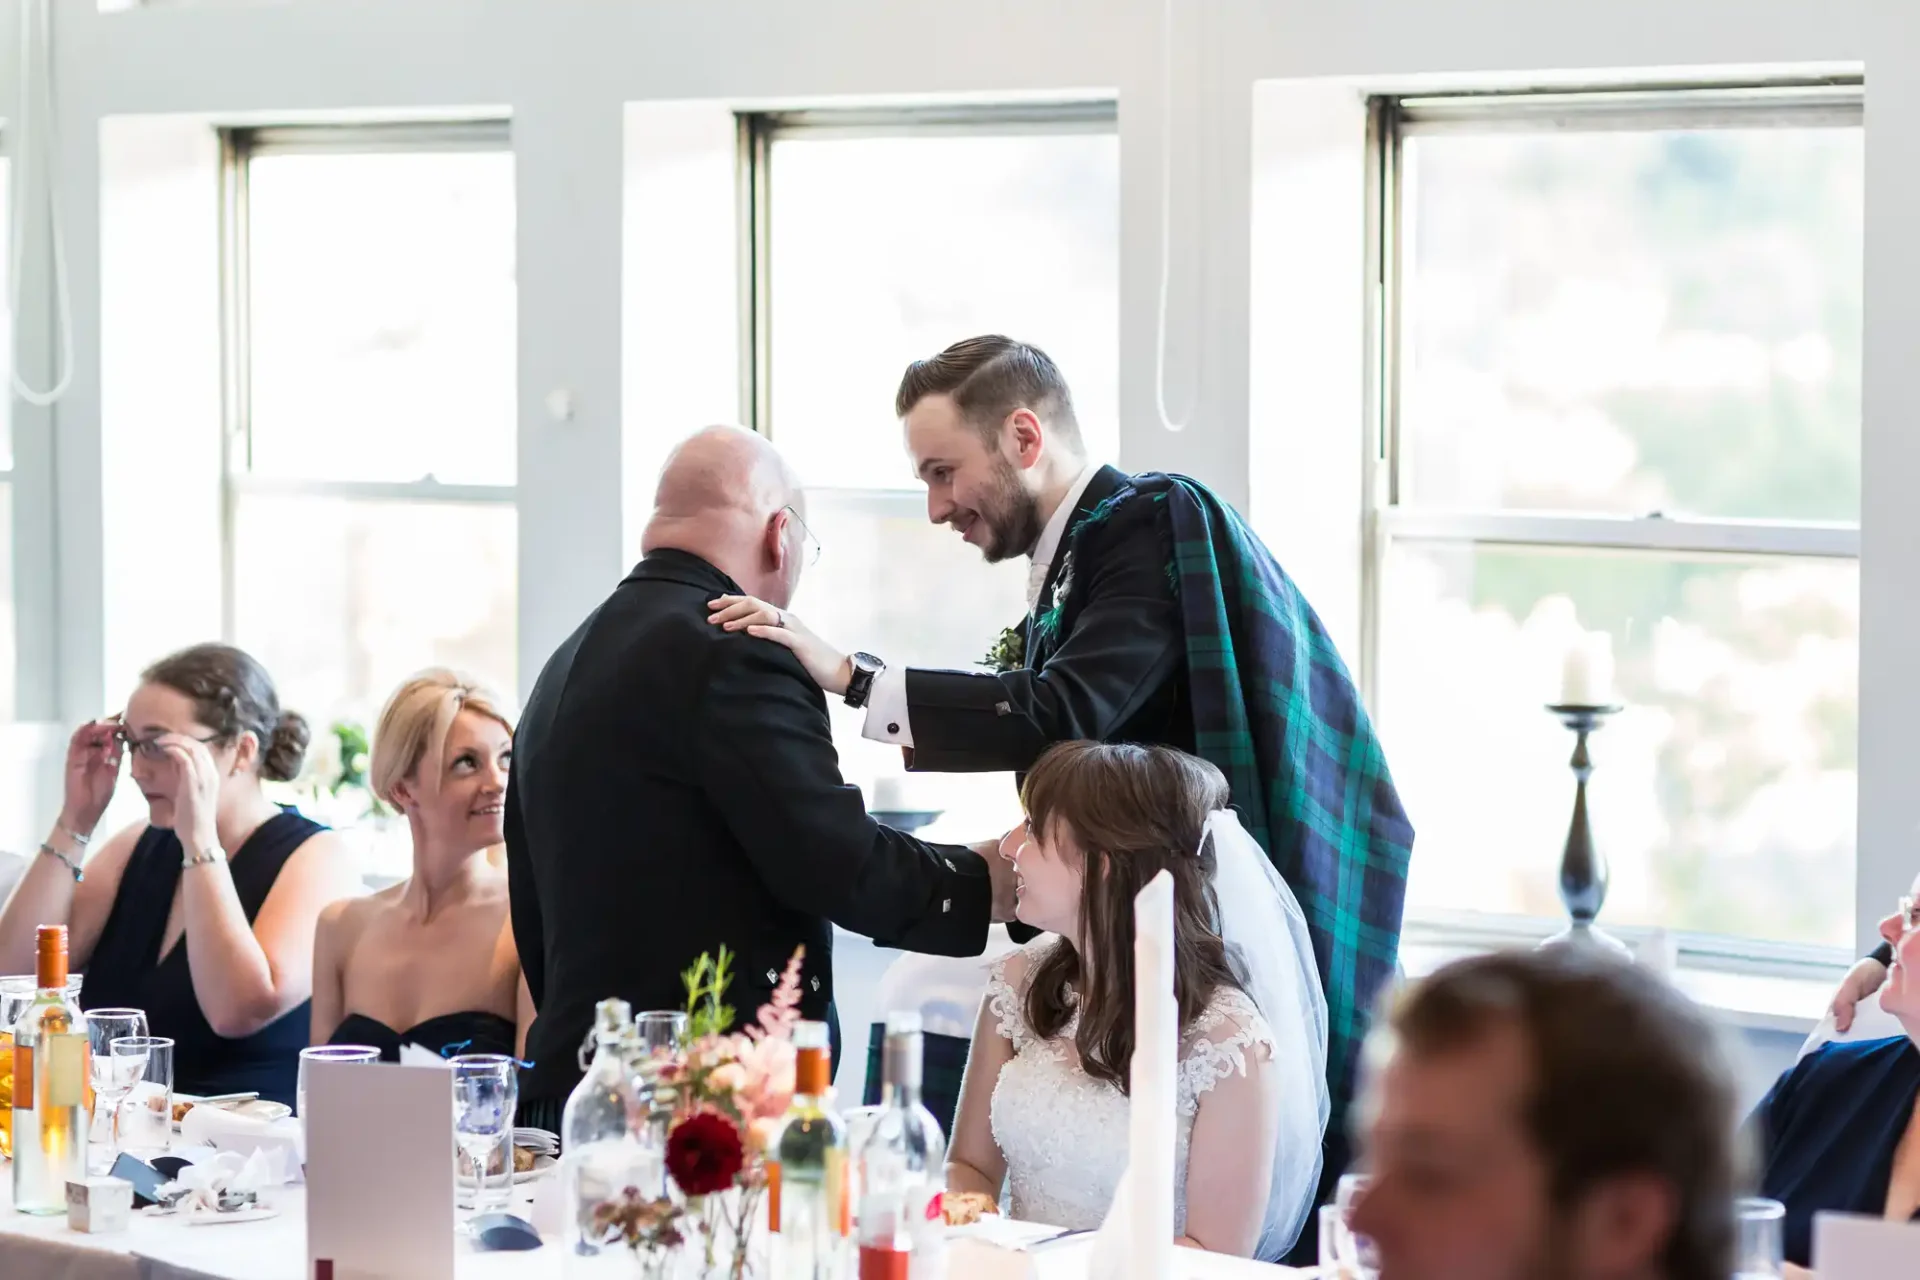 A groom in a kilt embraces an older man at a wedding reception, with guests looking on and smiling.